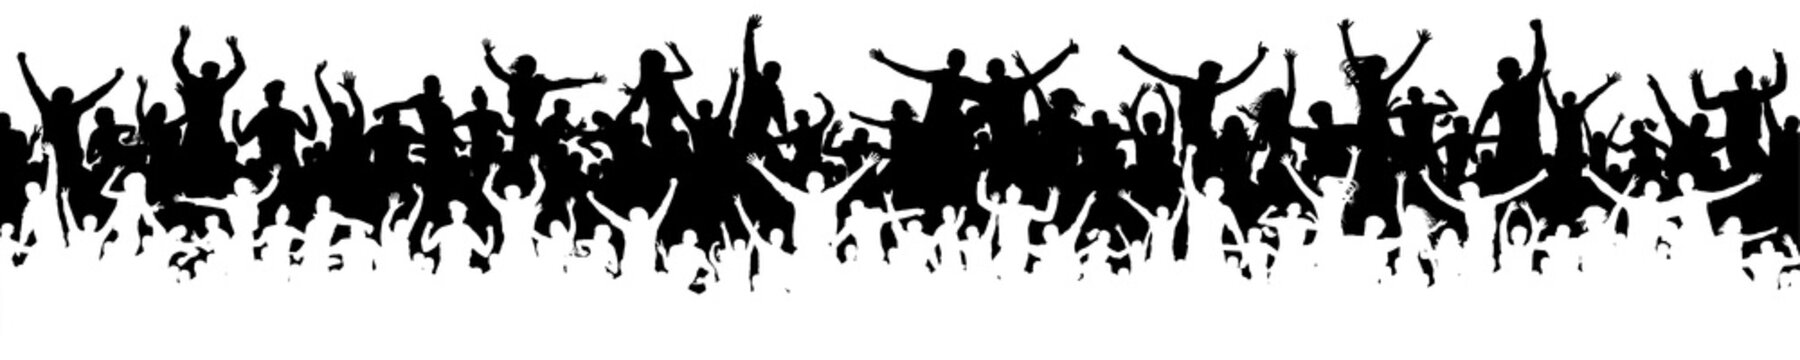 Crowd of fun people on party, holiday. Cheerful people having fun celebrating. Sporting event. Panorama of jubilant youth. Applause people hands up. Silhouette Vector Illustration